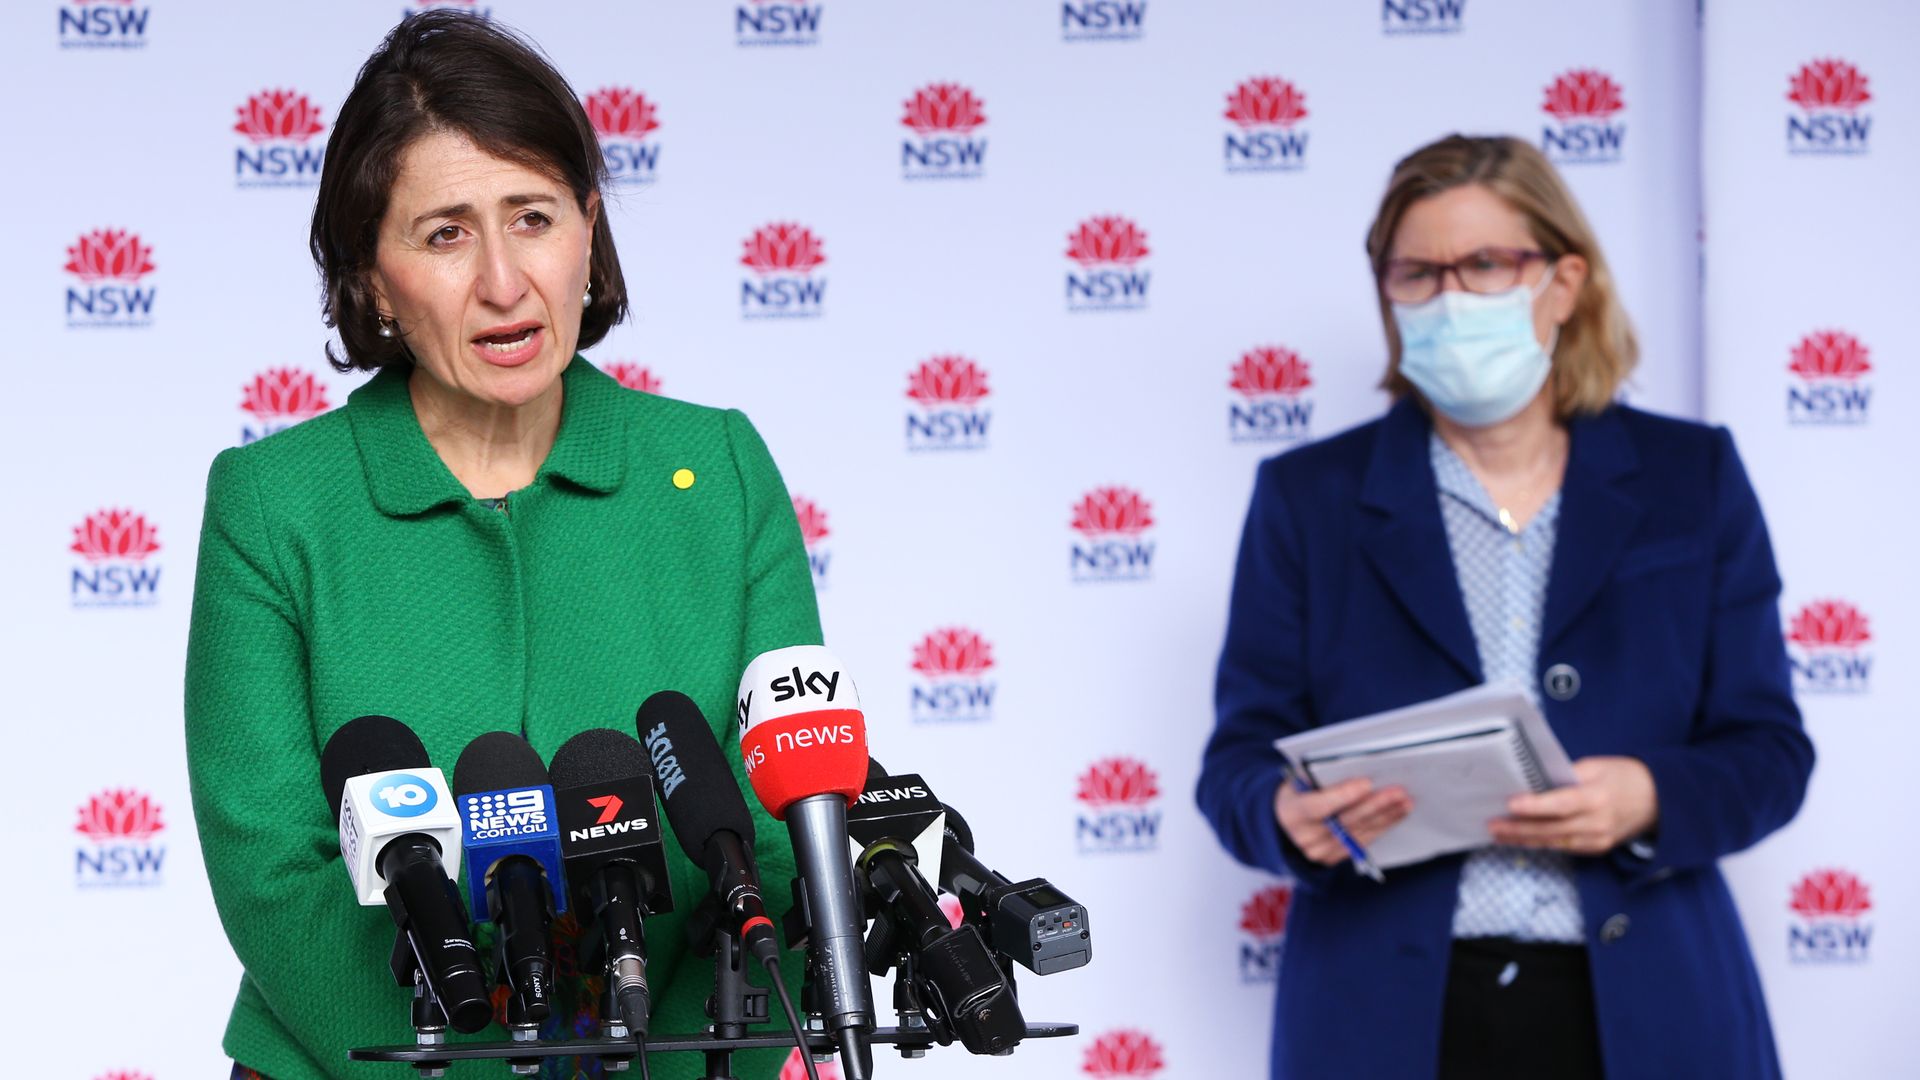  Premier Gladys Berejiklian and NSW Chief Health Officer Dr Kerry Chant speak during a press conference on June 24, 2021 in Sydney, Australia.